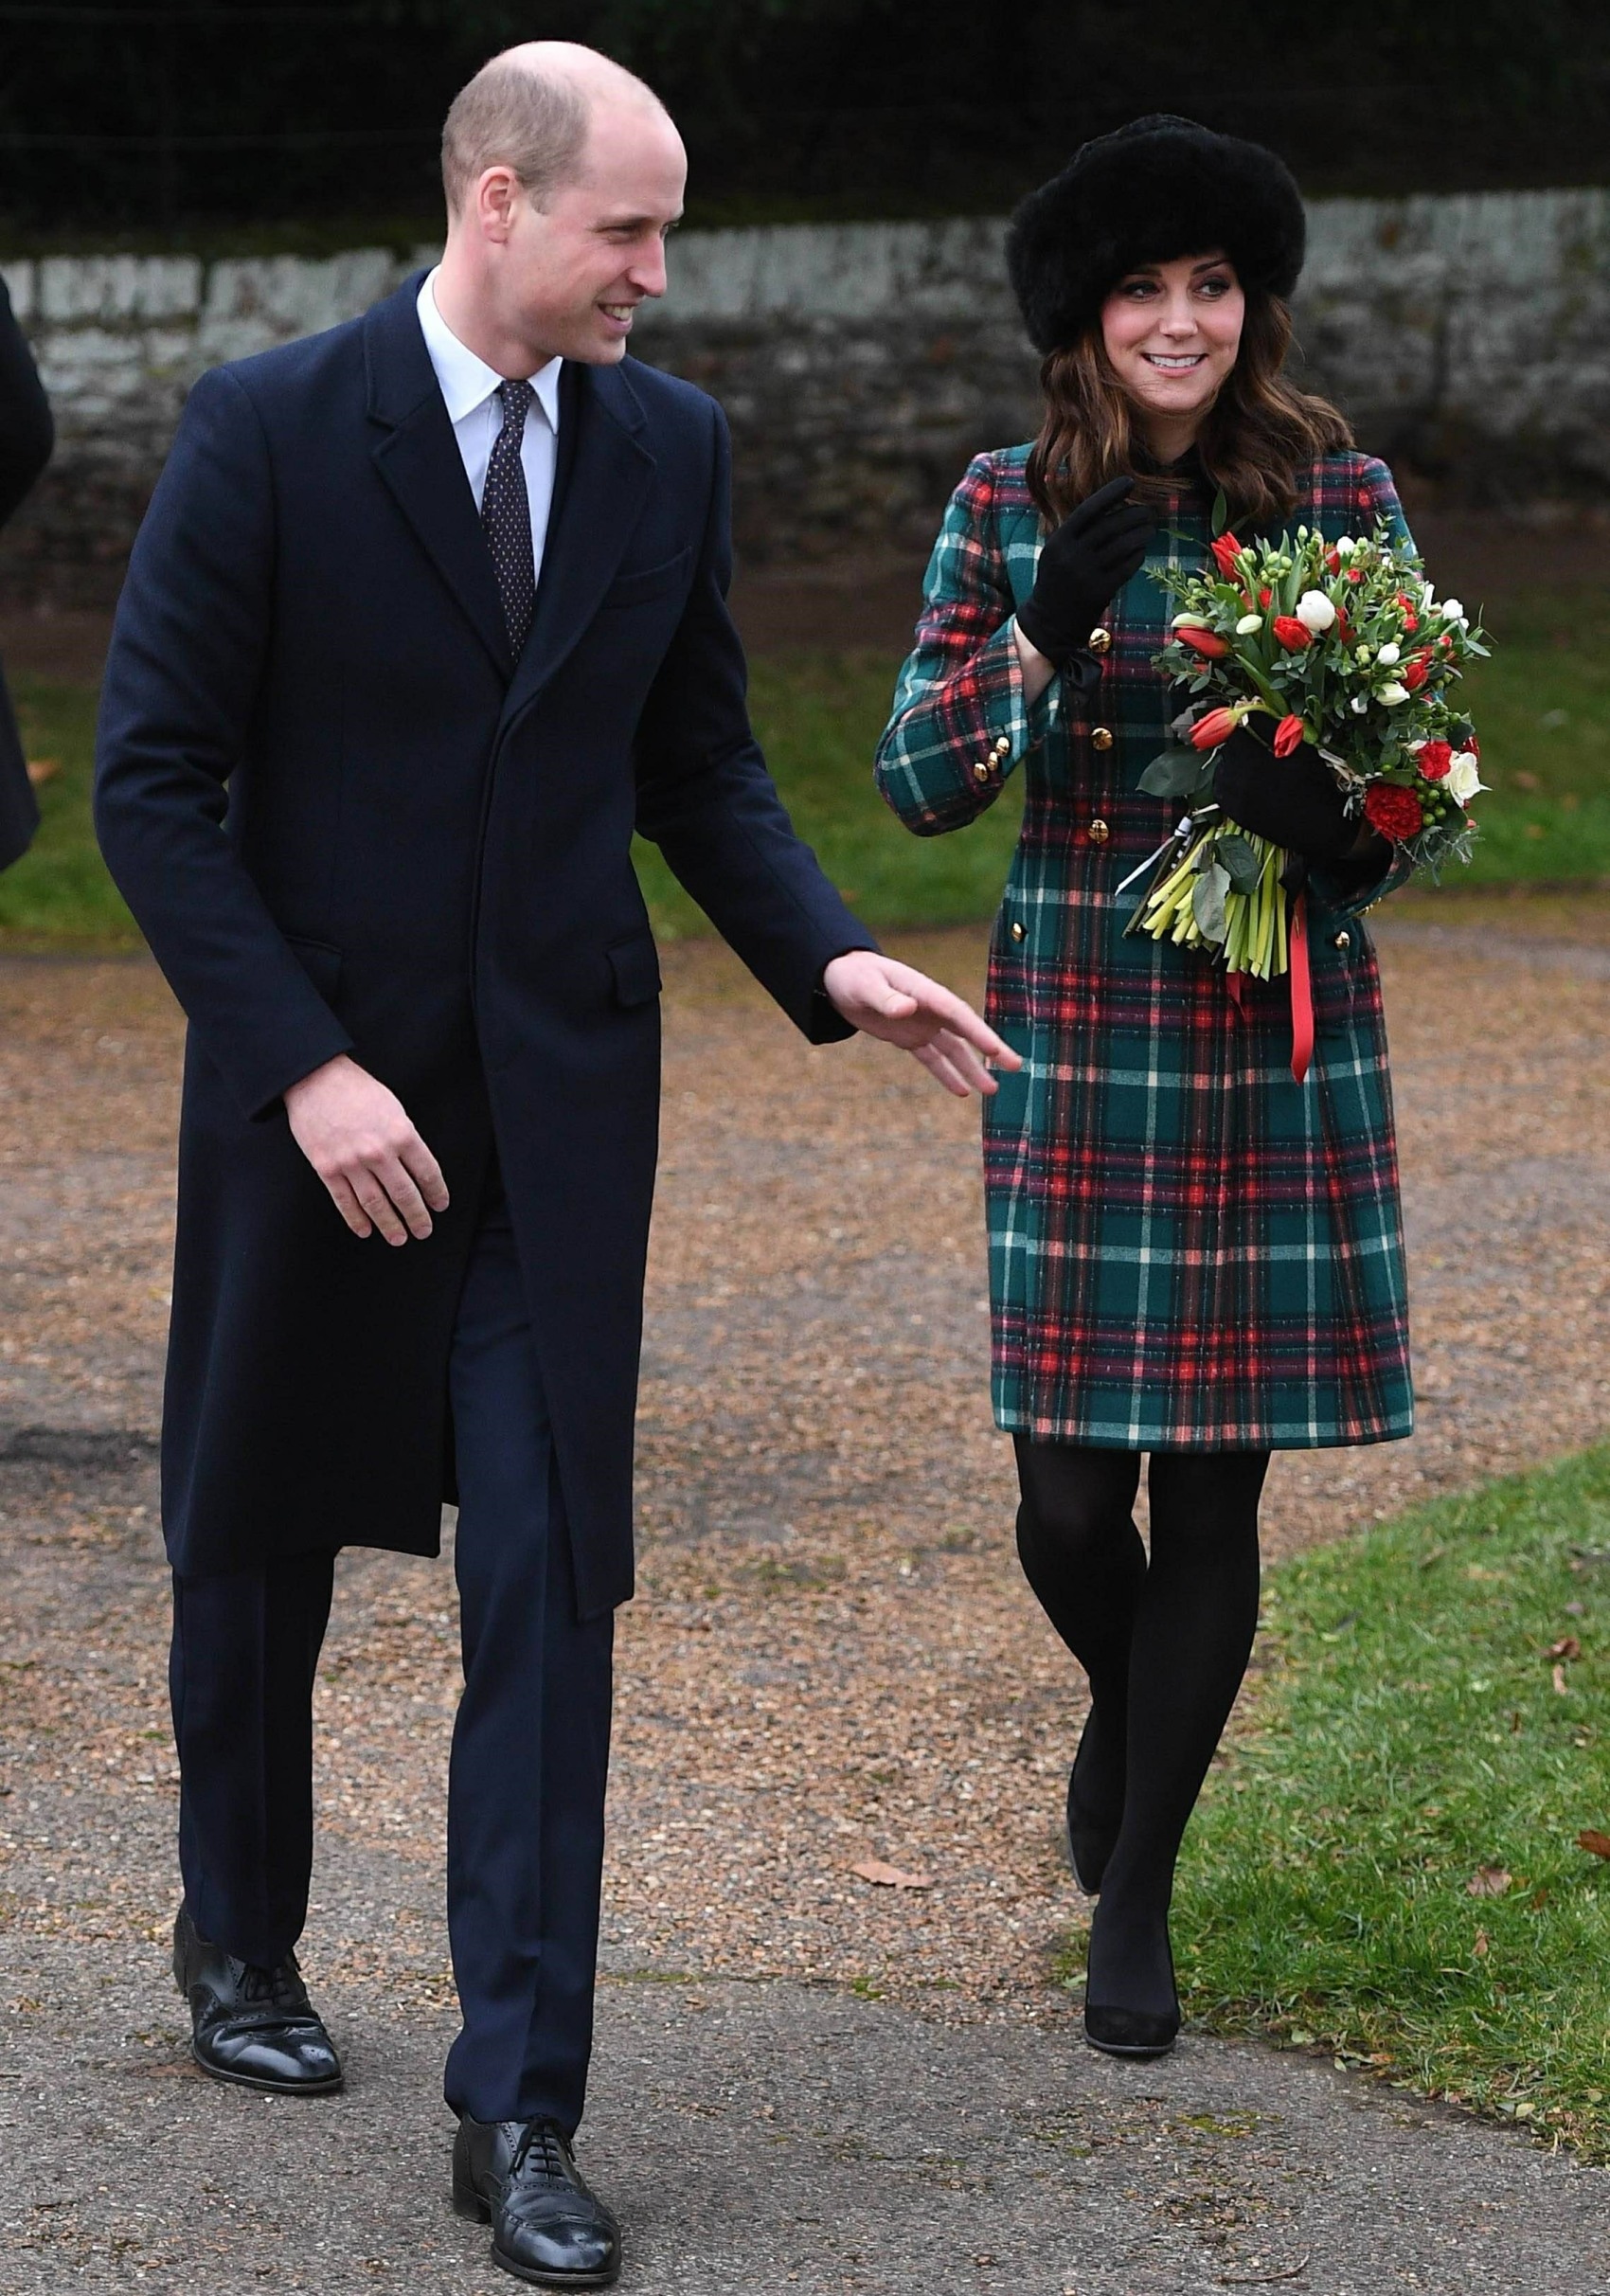 The royal family attends a Christmas Day church service in Britain